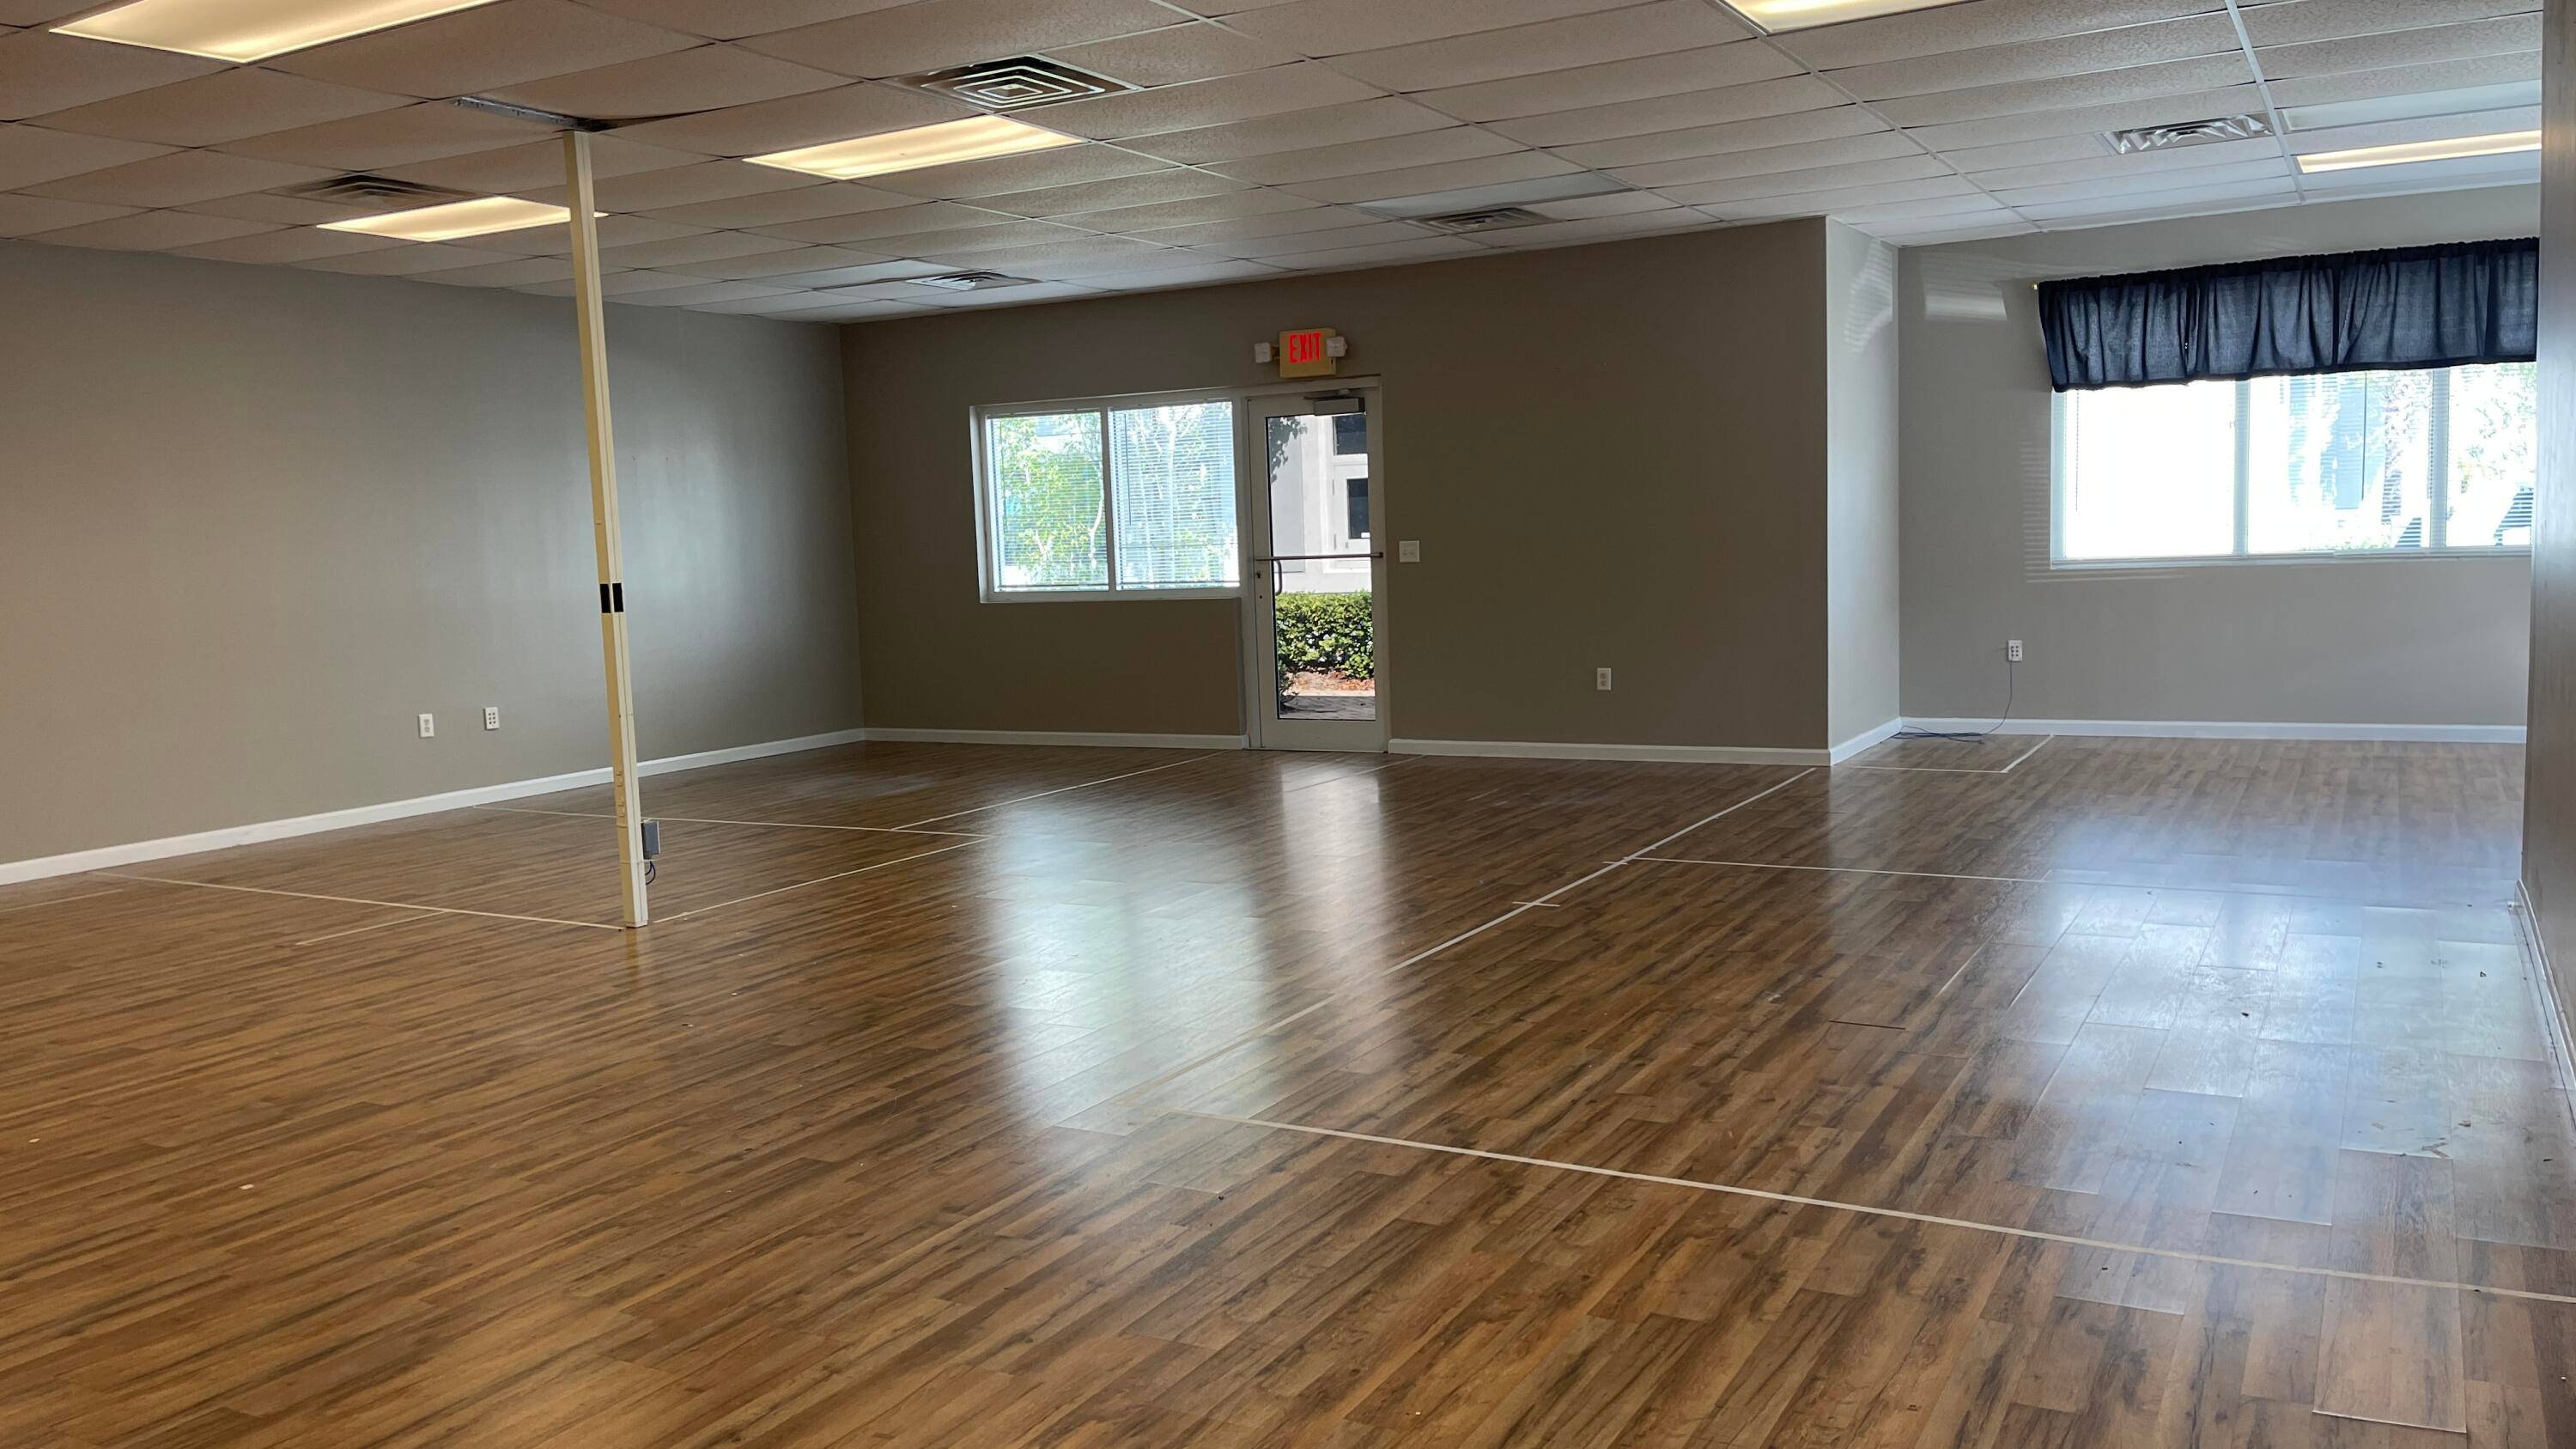 This office space for rent is perfect for any business or organization.